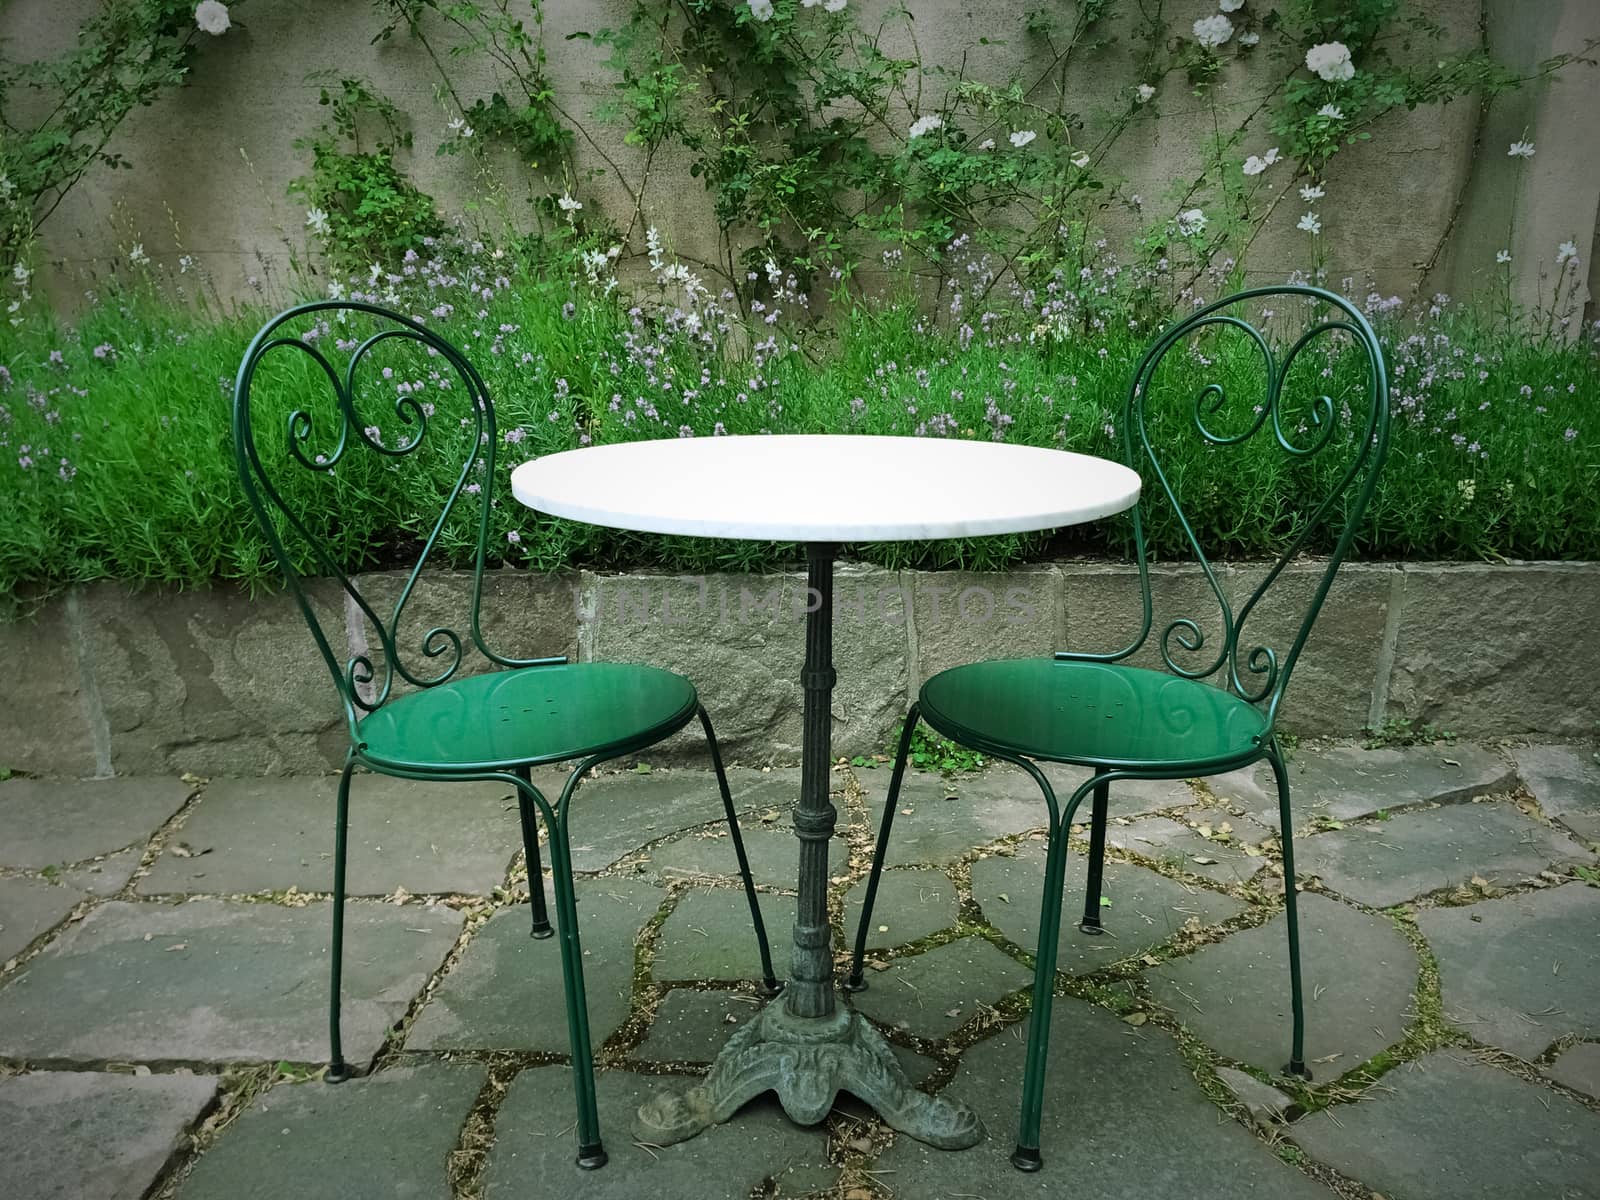 Chairs and table in a magic summer garden  by anikasalsera